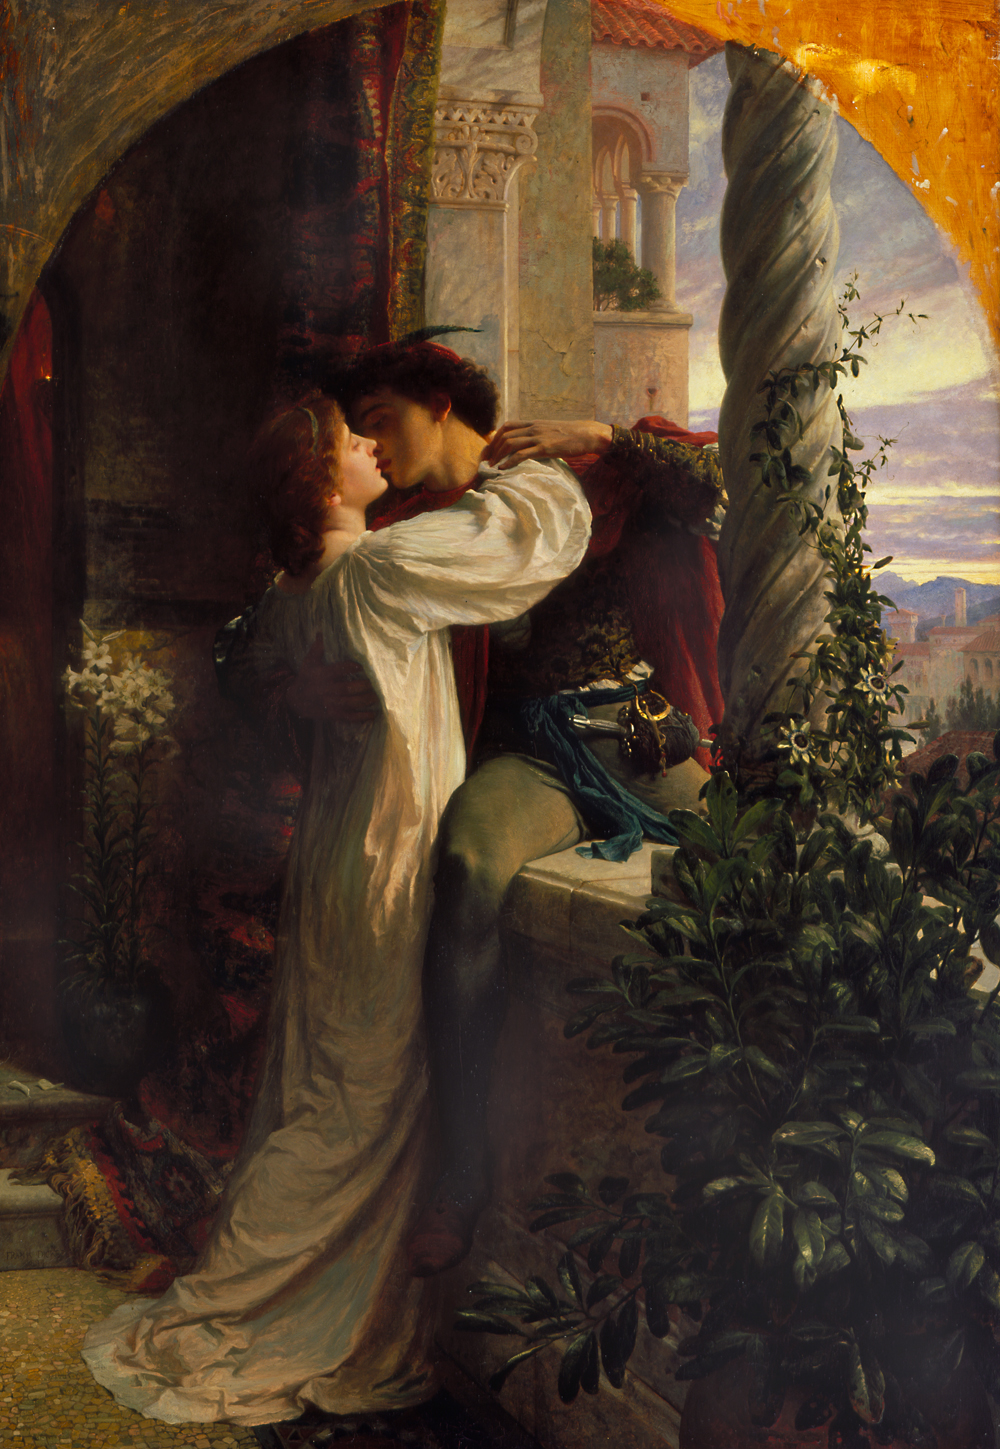 Romeo and Juliet painting